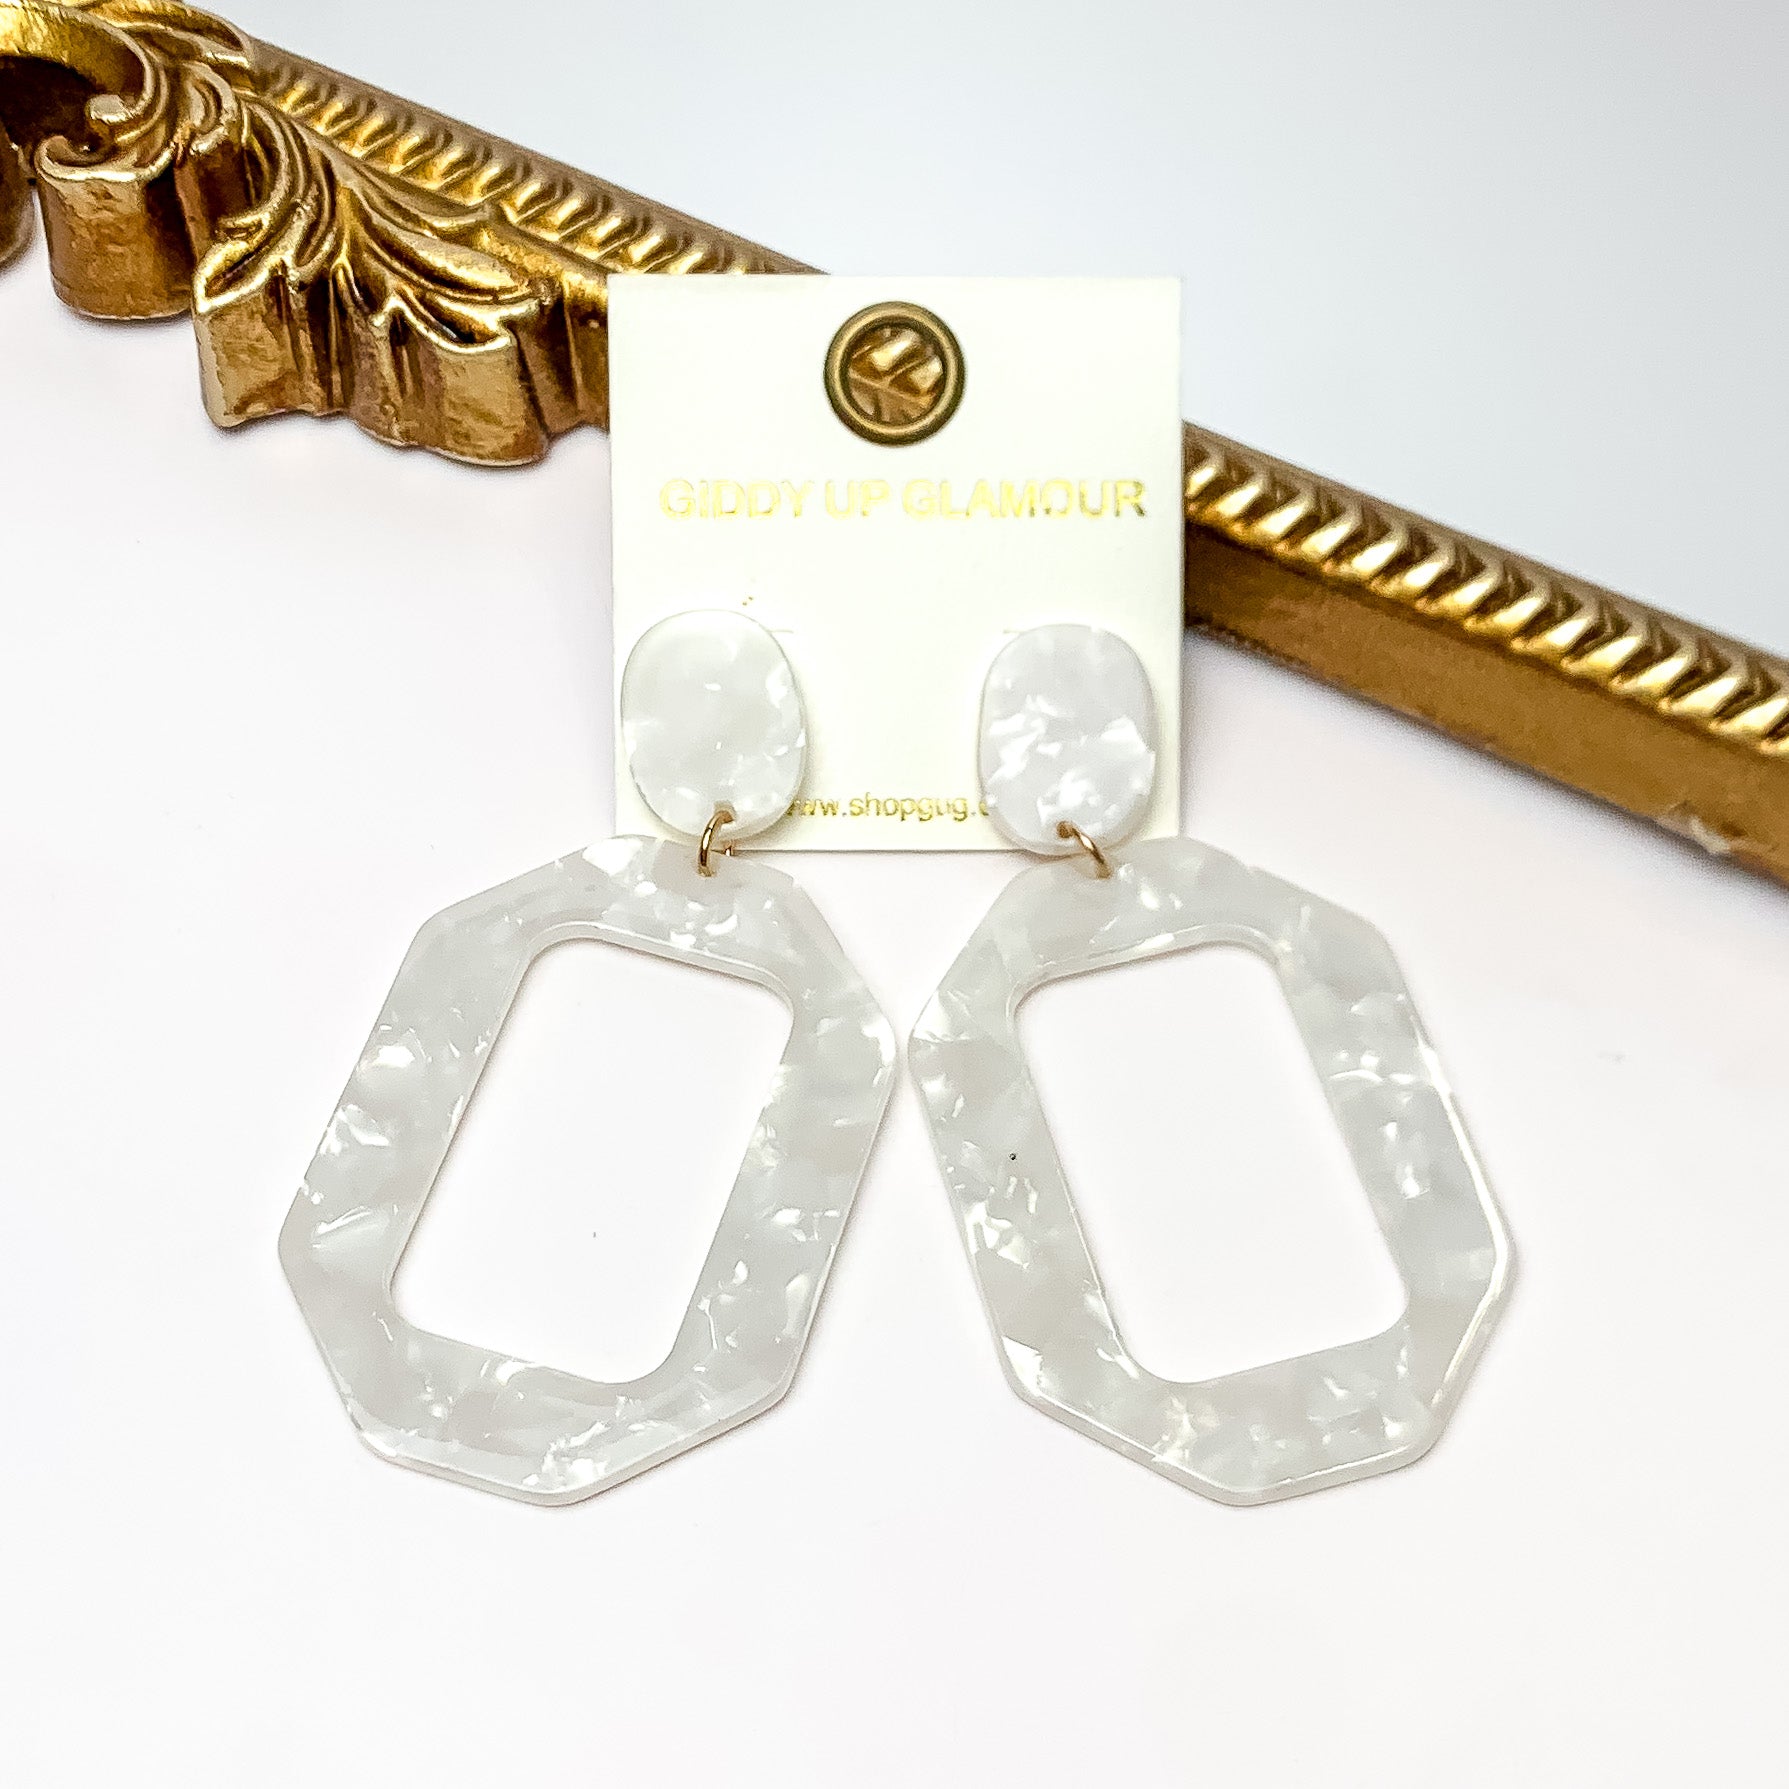 Malibu Marble Open Rectangle Earrings in White. Pictured on a white background with the earrings laying on a gold frame.